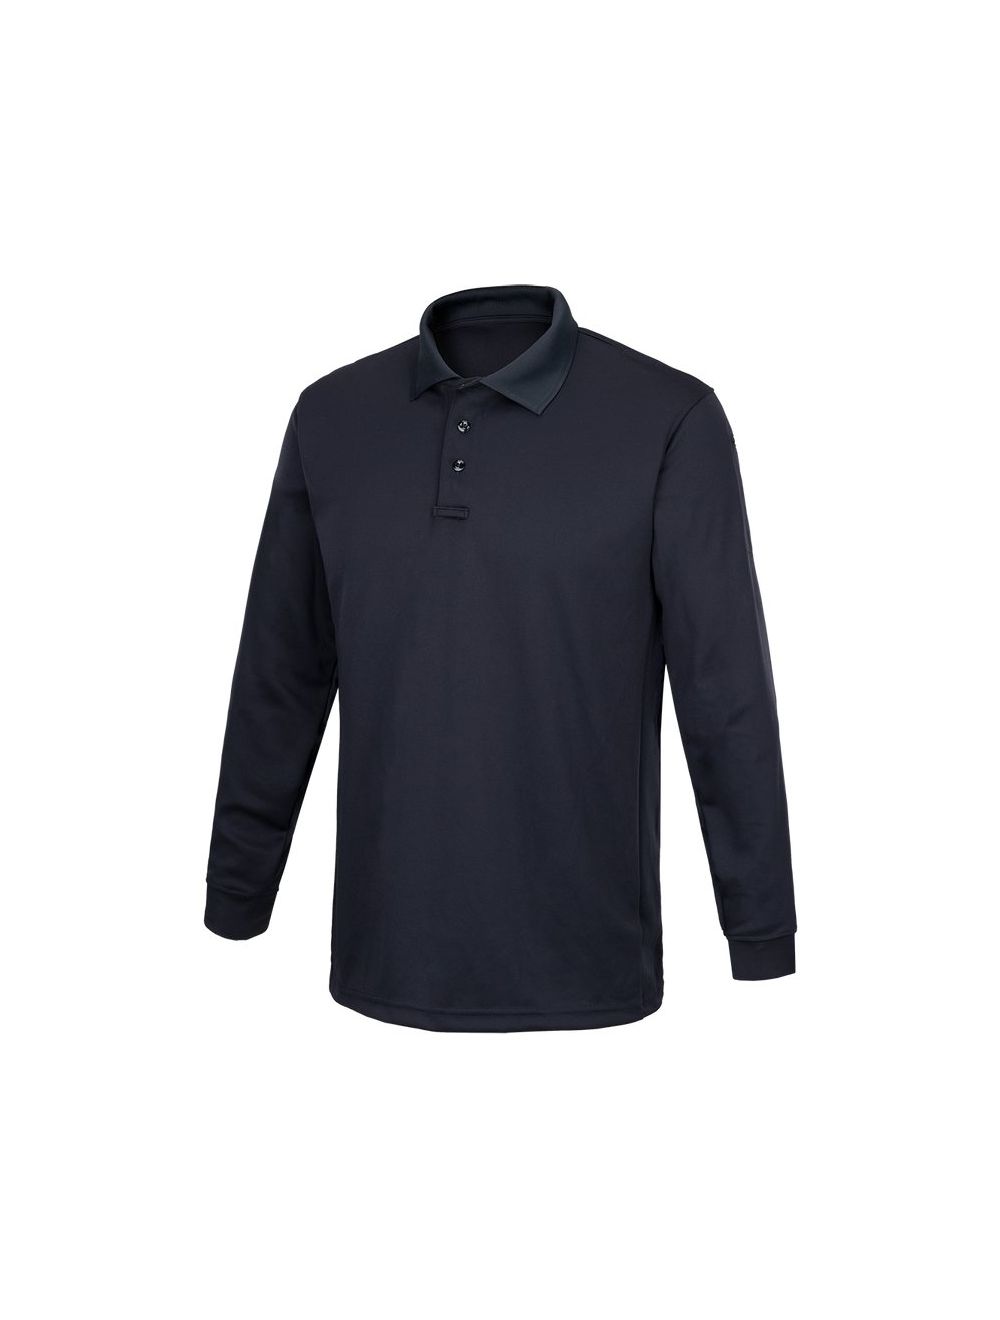 Flying Cross Men's Long Sleeve Impact Polo F1 3220 - Newest Products